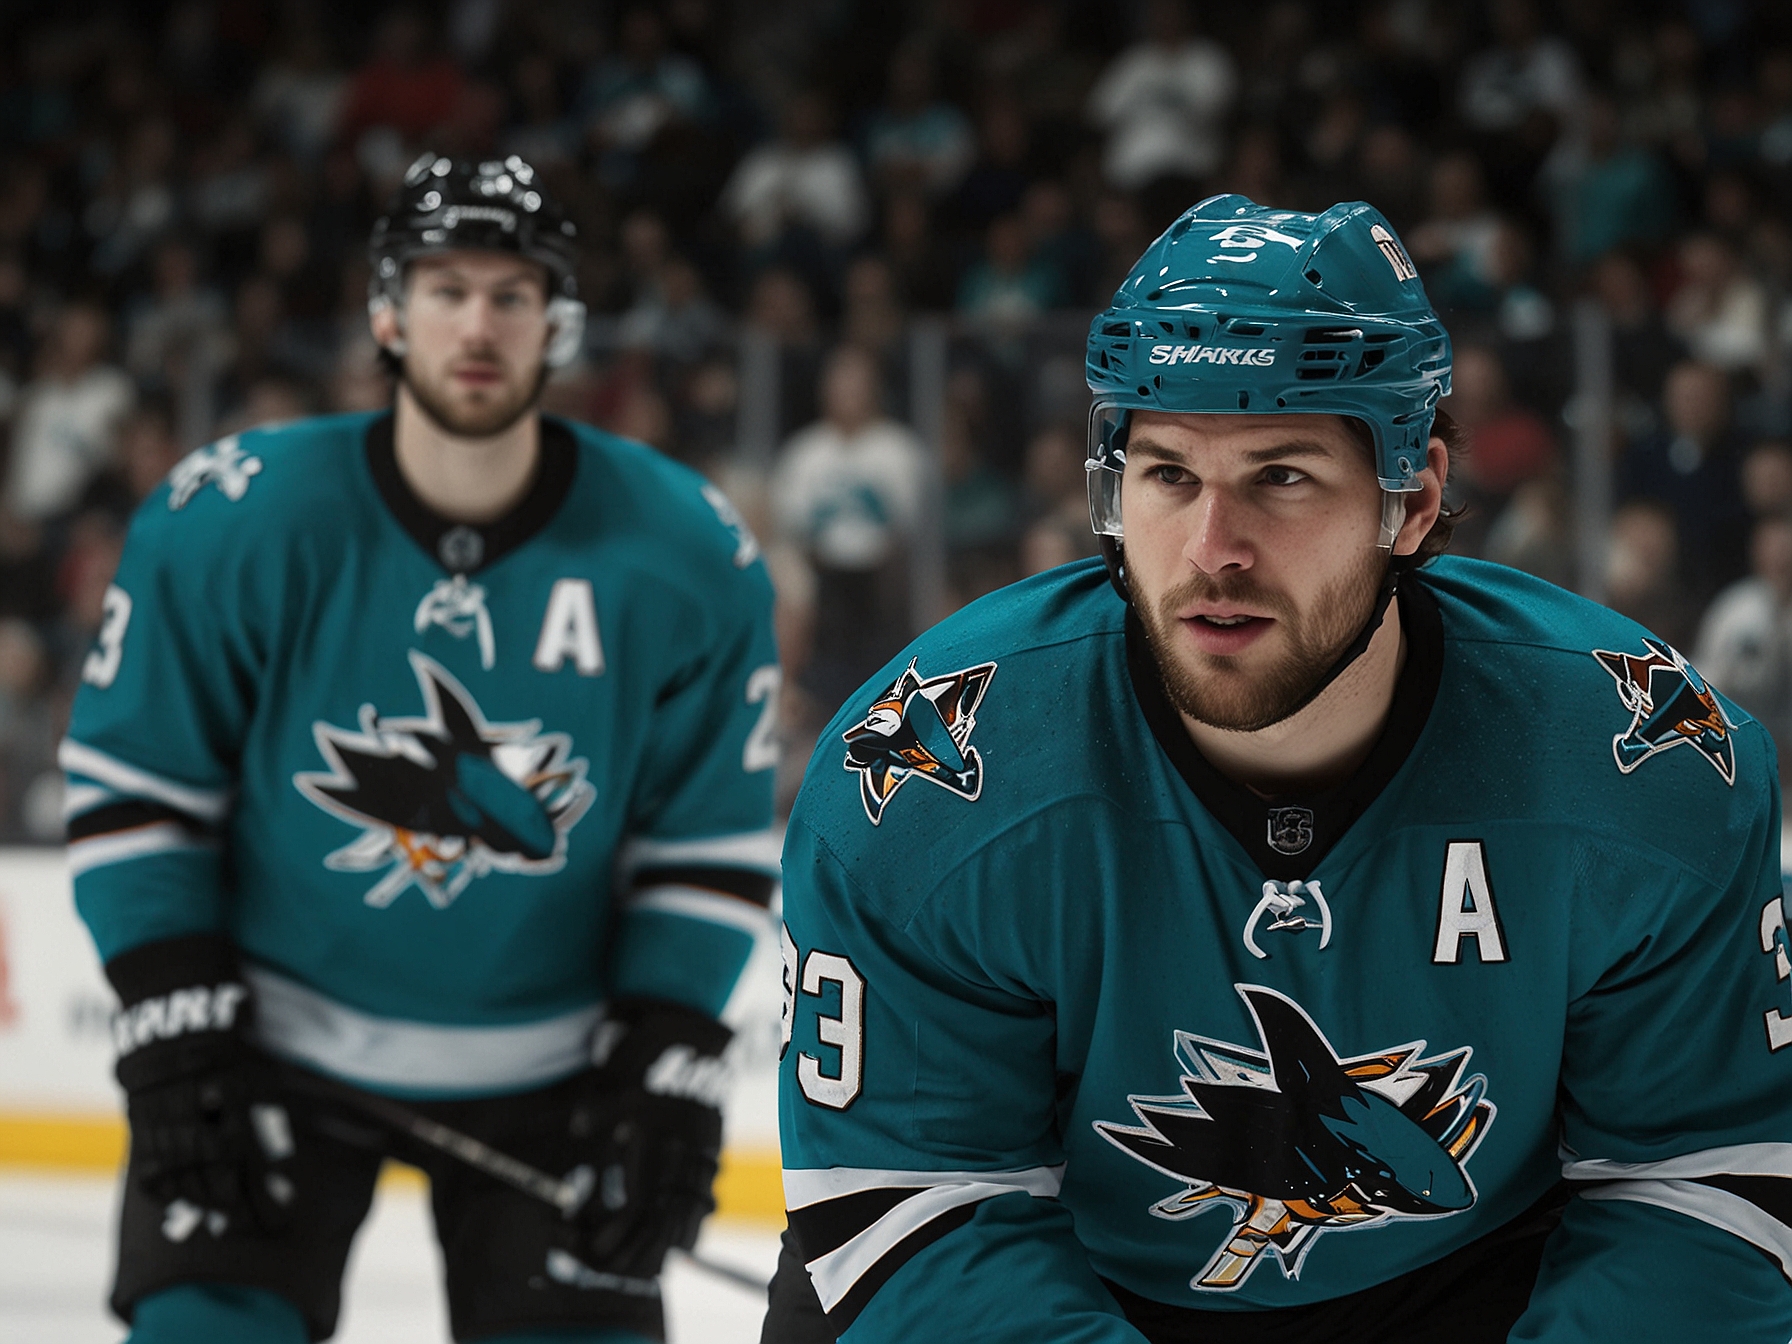 Logan Couture, captain of the San Jose Sharks, leading his team during an intense NHL game, showcasing his leadership and strategic influence on ice.